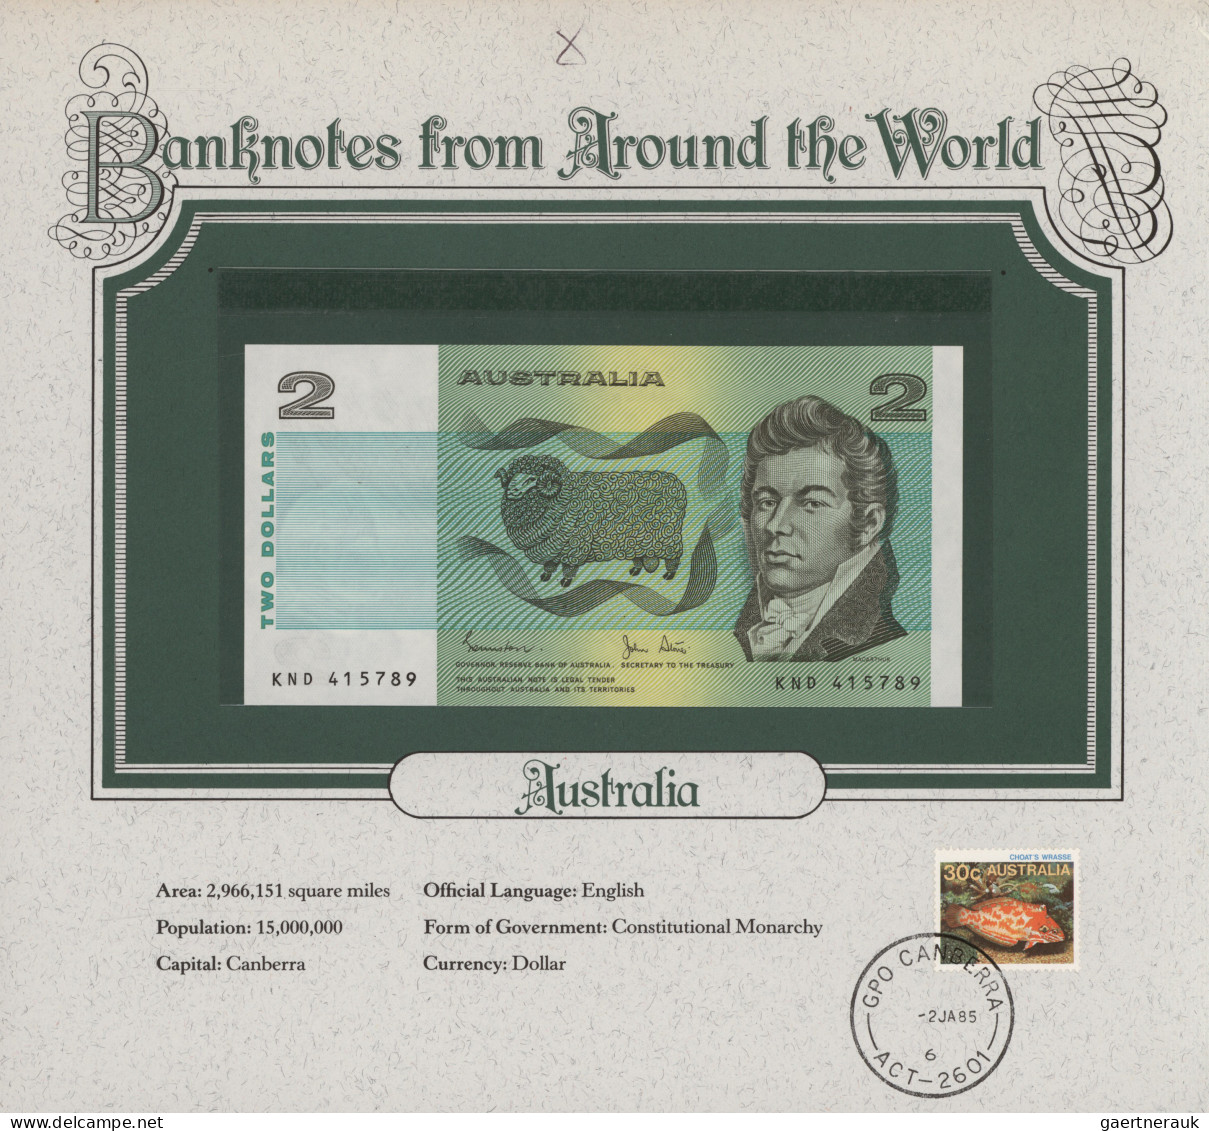 Worldwide: Huge collection of 35 graded world banknotes, comprising for example